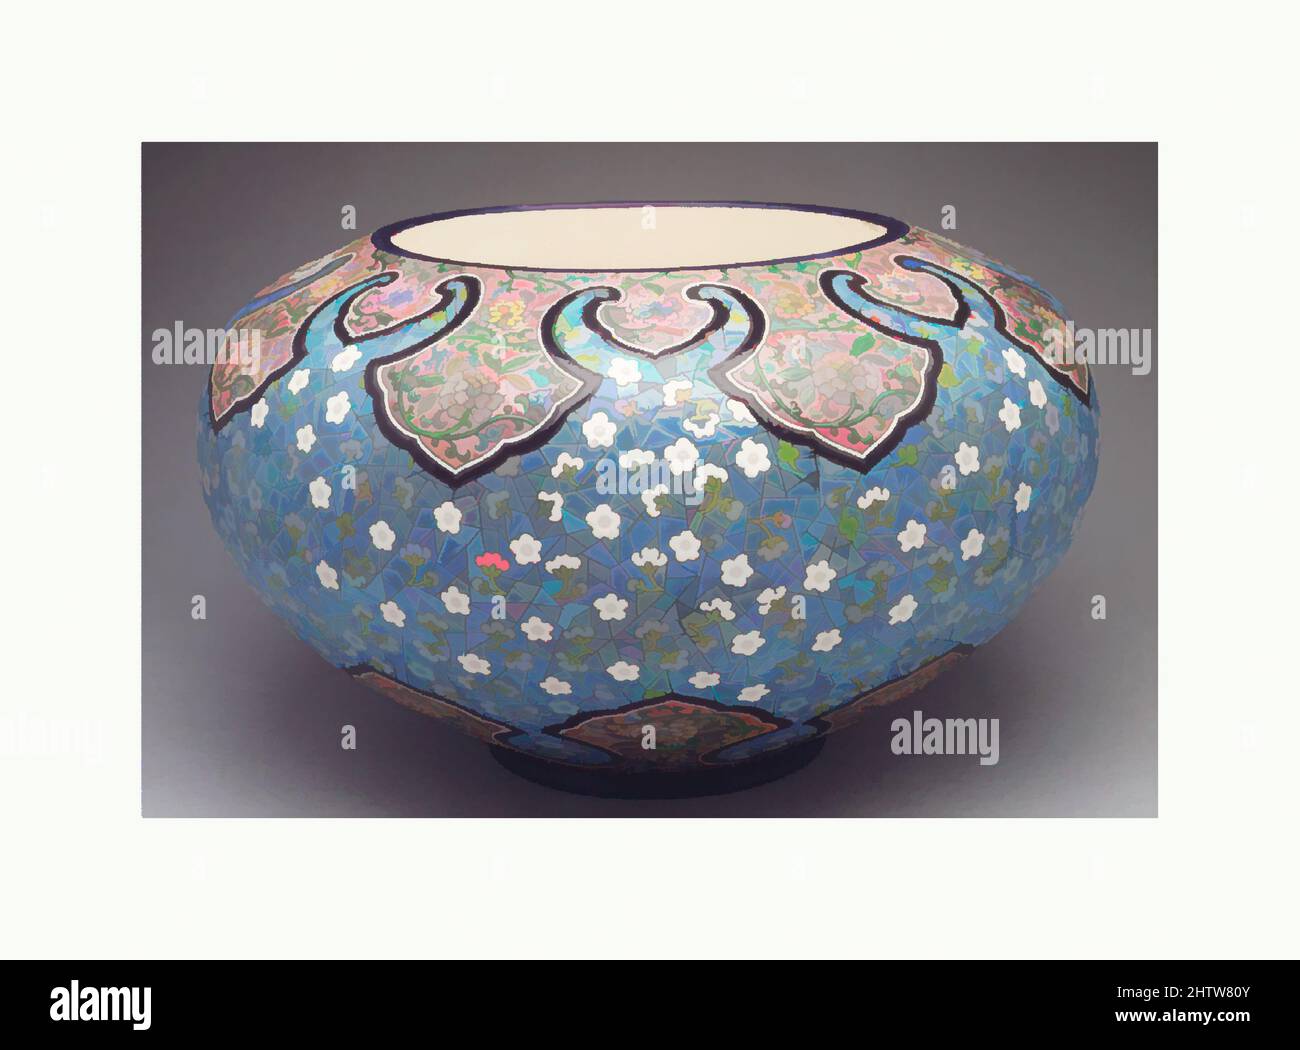 Art inspired by Jardinière, ca. 1873–80, French, Longwy, Glazed earthenware, 10 1/2 × 18 in. (26.7 × 45.7 cm), Ceramics-Pottery, Classic works modernized by Artotop with a splash of modernity. Shapes, color and value, eye-catching visual impact on art. Emotions through freedom of artworks in a contemporary way. A timeless message pursuing a wildly creative new direction. Artists turning to the digital medium and creating the Artotop NFT Stock Photo